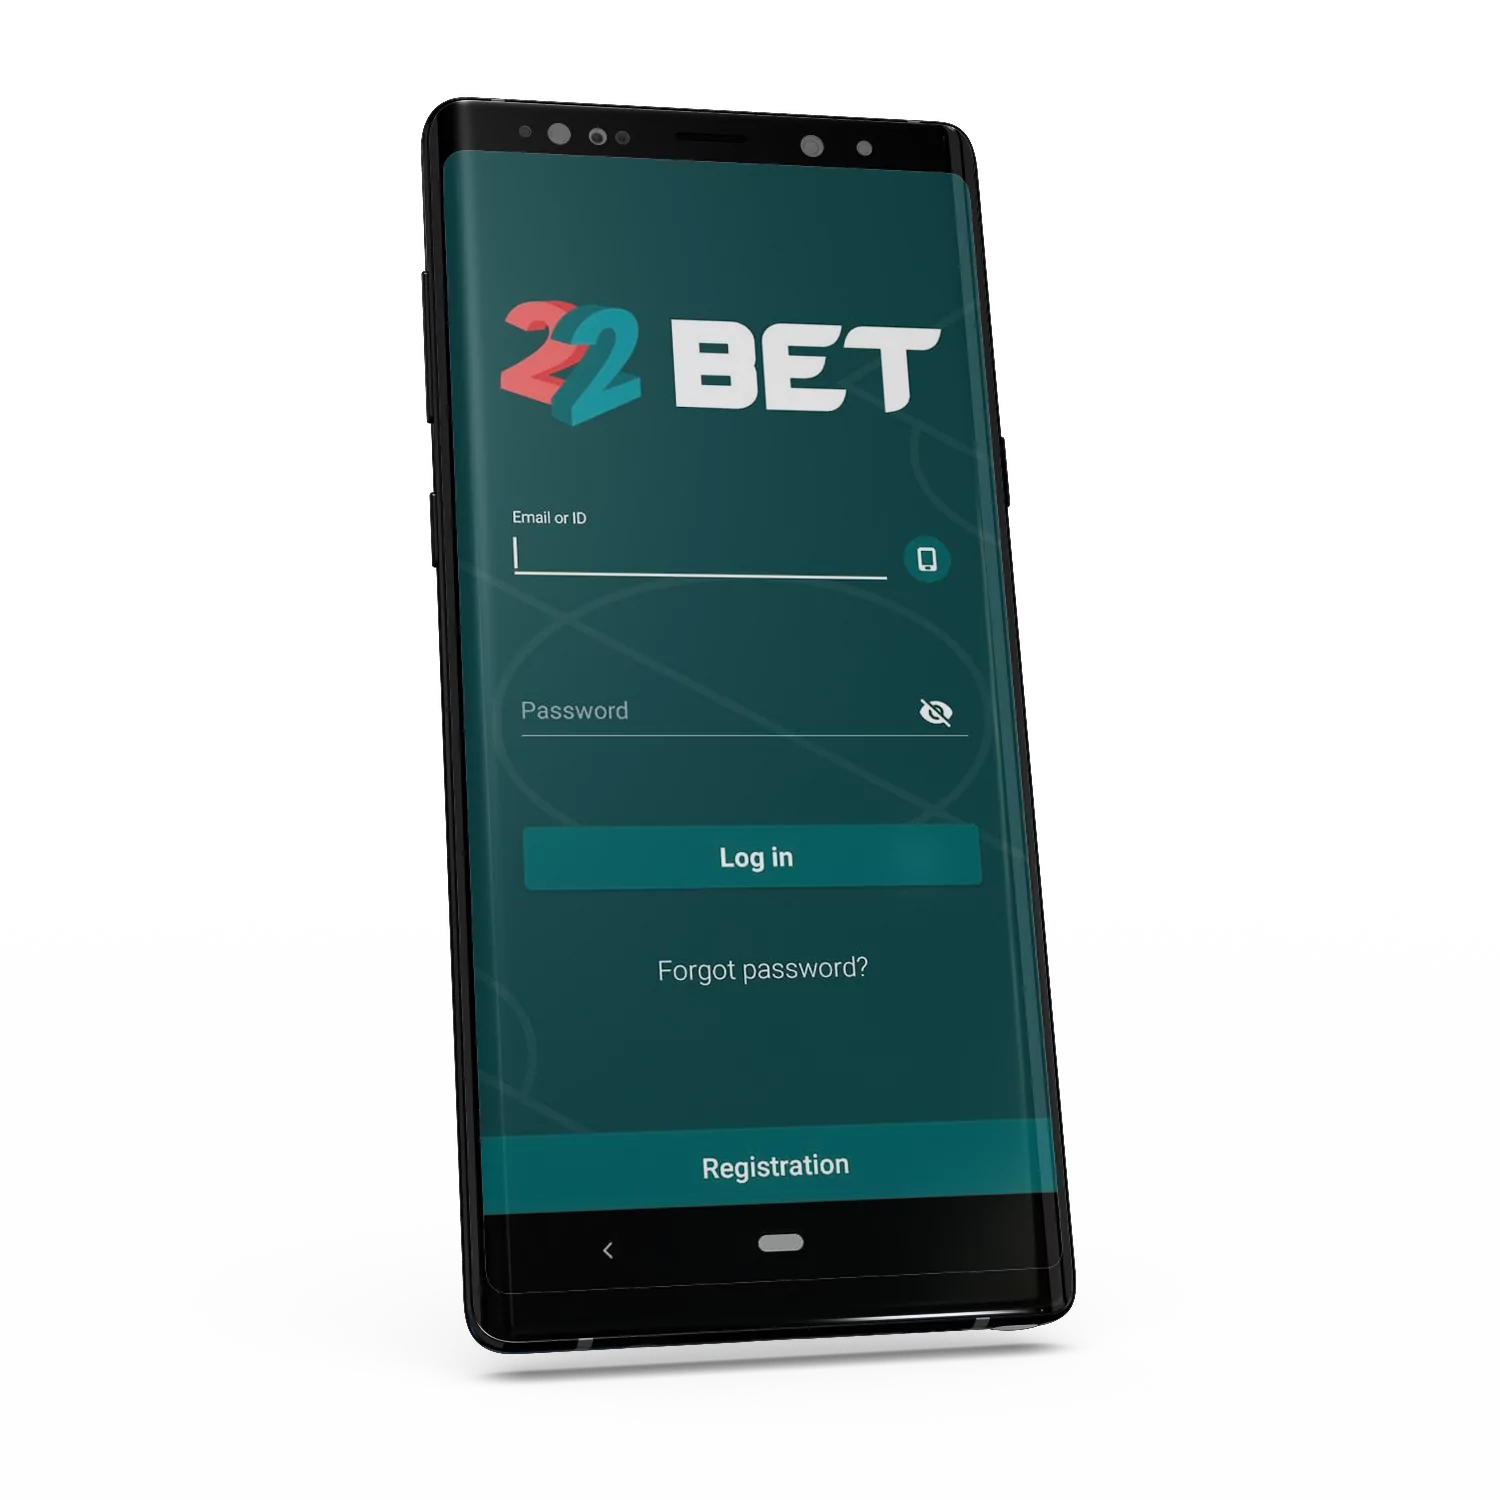 The application 22Bet can be downloaded to your smartphone from the official website.